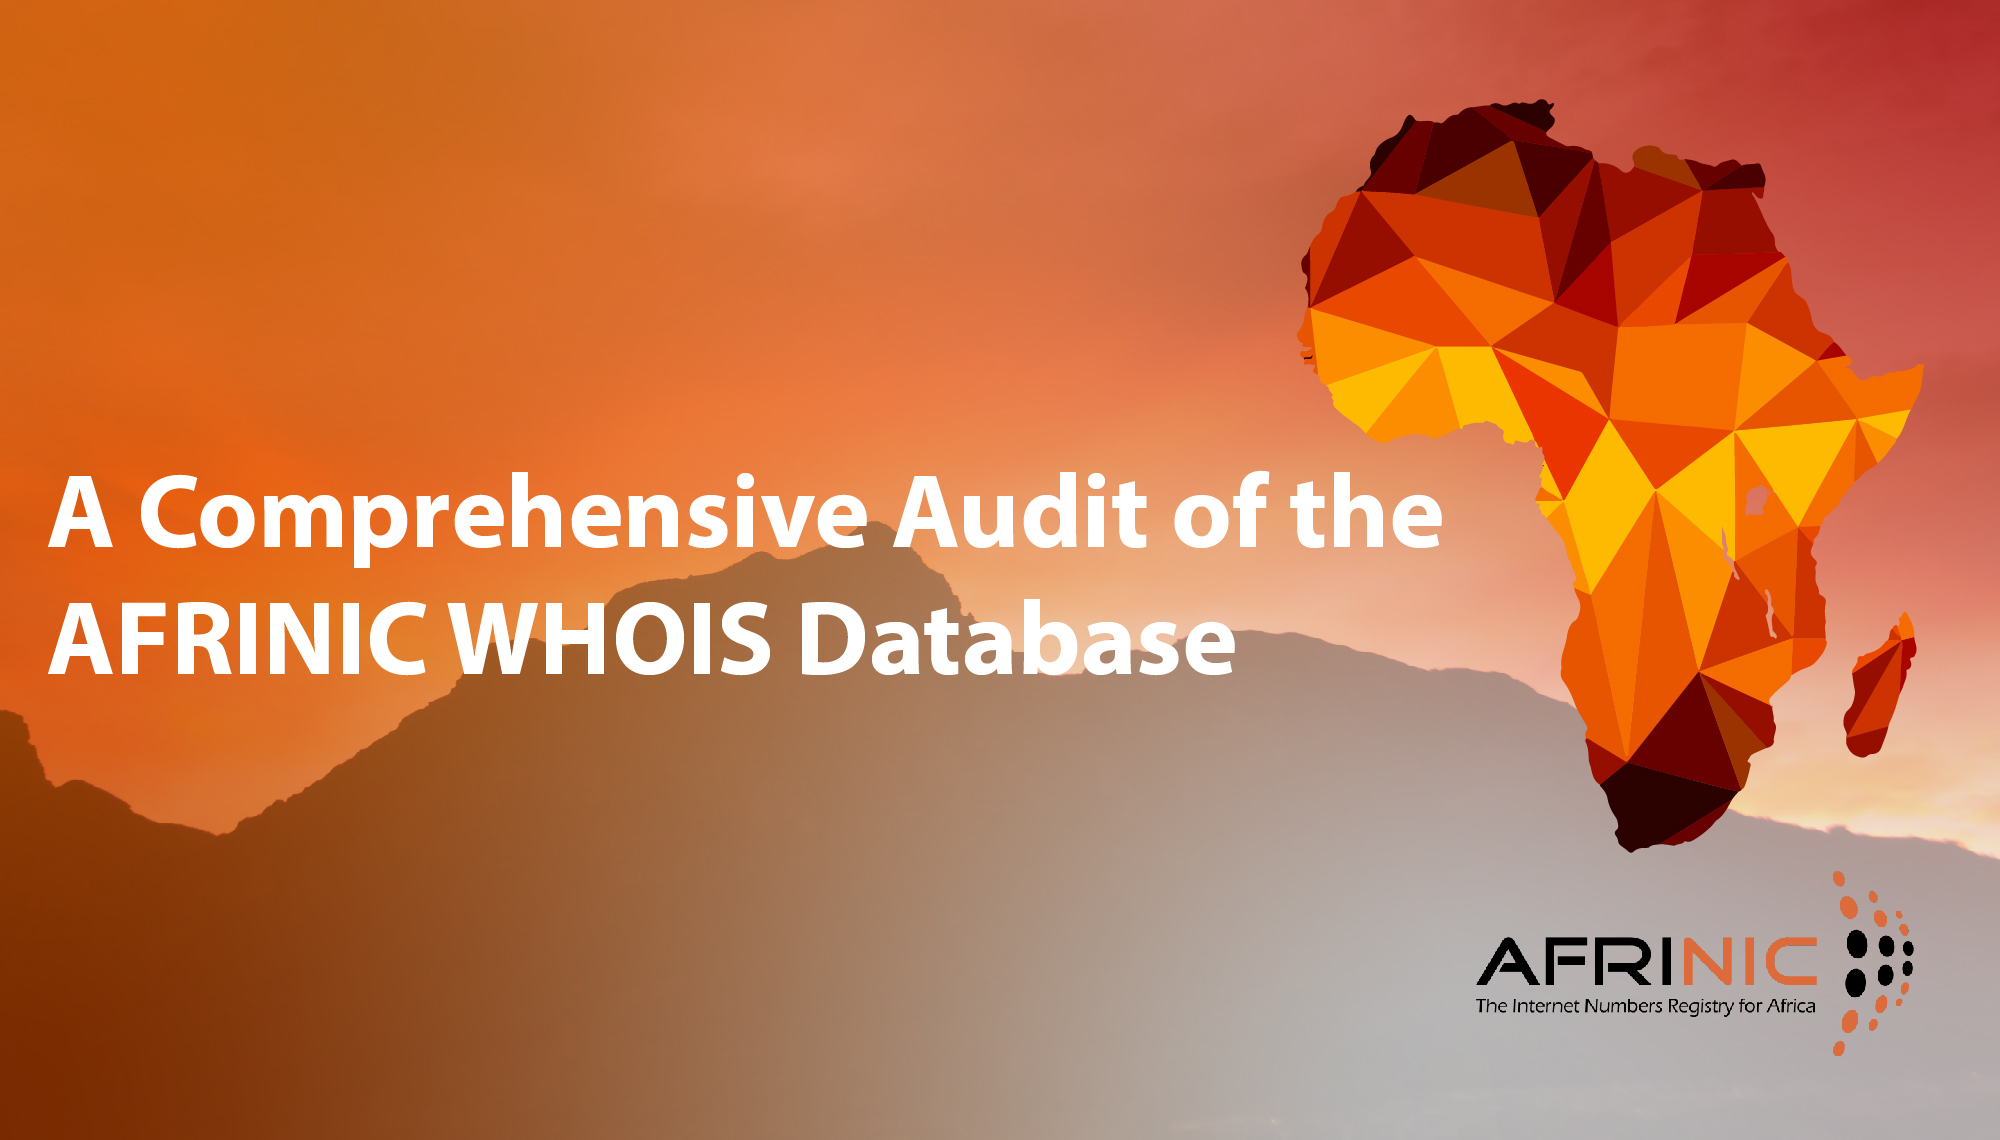 A Comprehensive Audit of the AFRINIC WHOIS Database